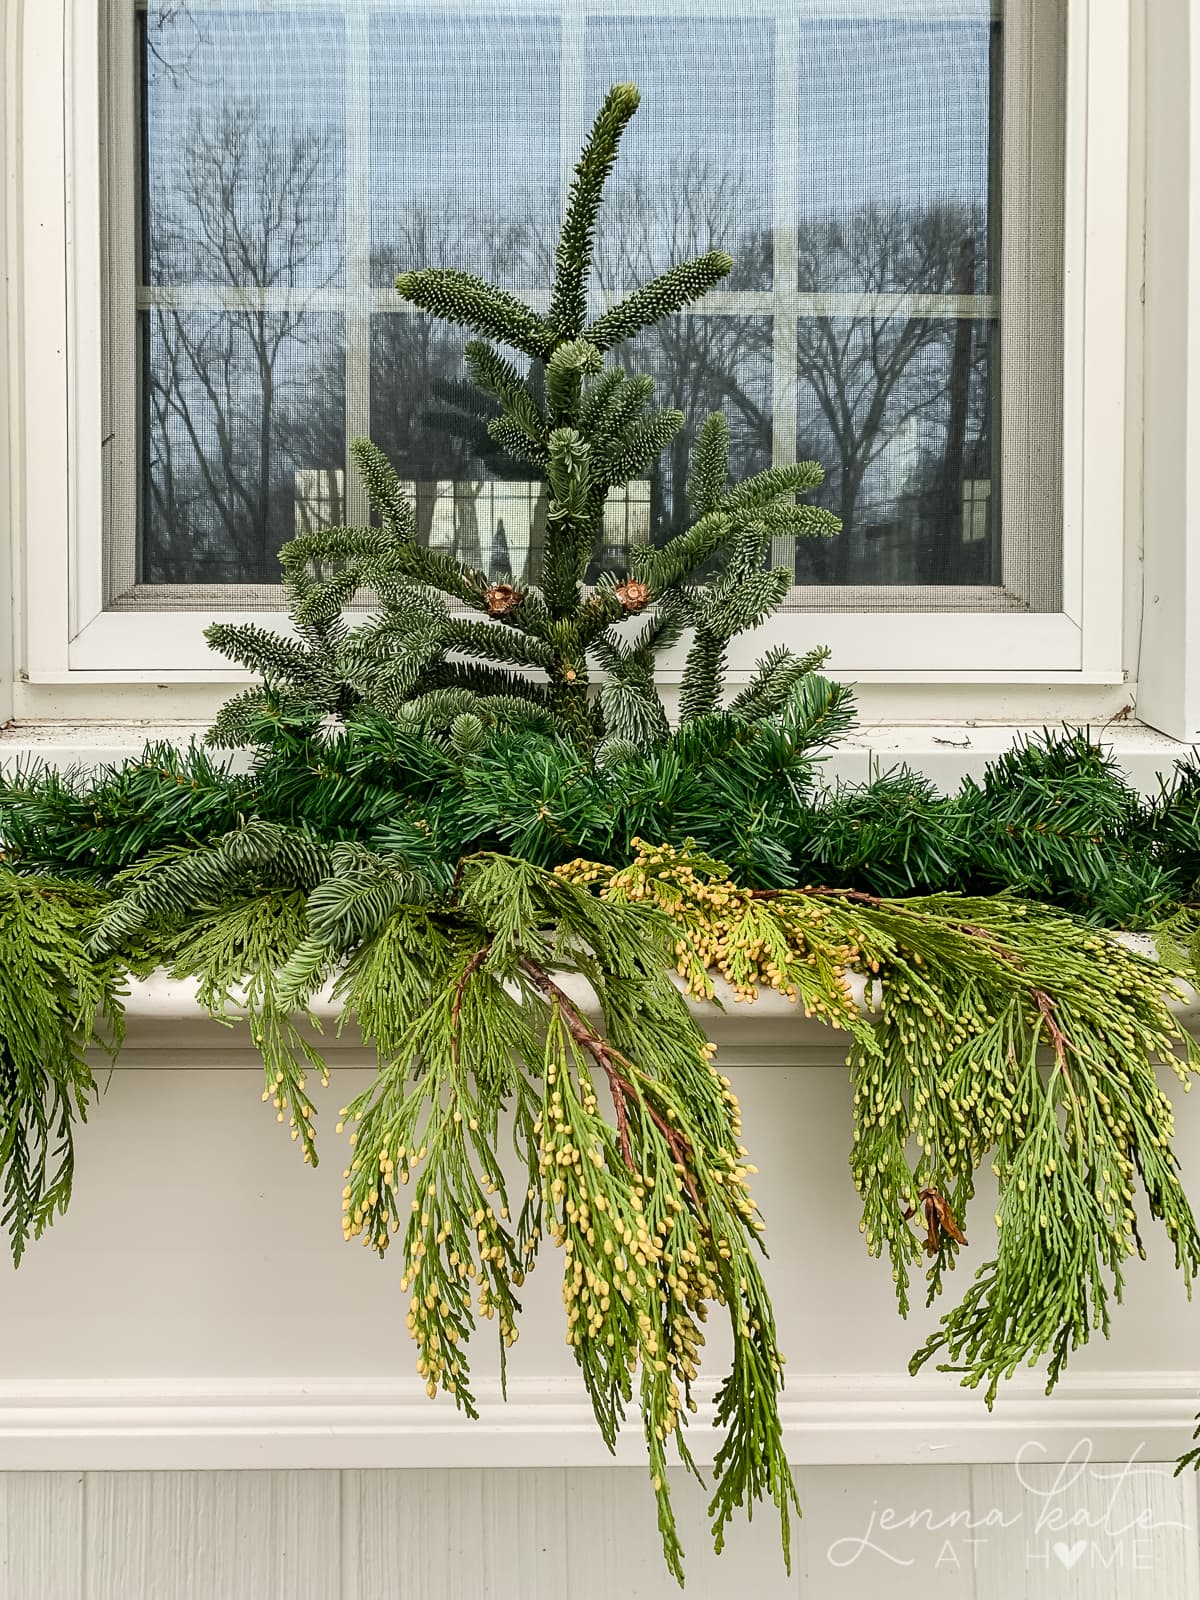 A large piece of fir at the back of the window box with cedar draping over the front